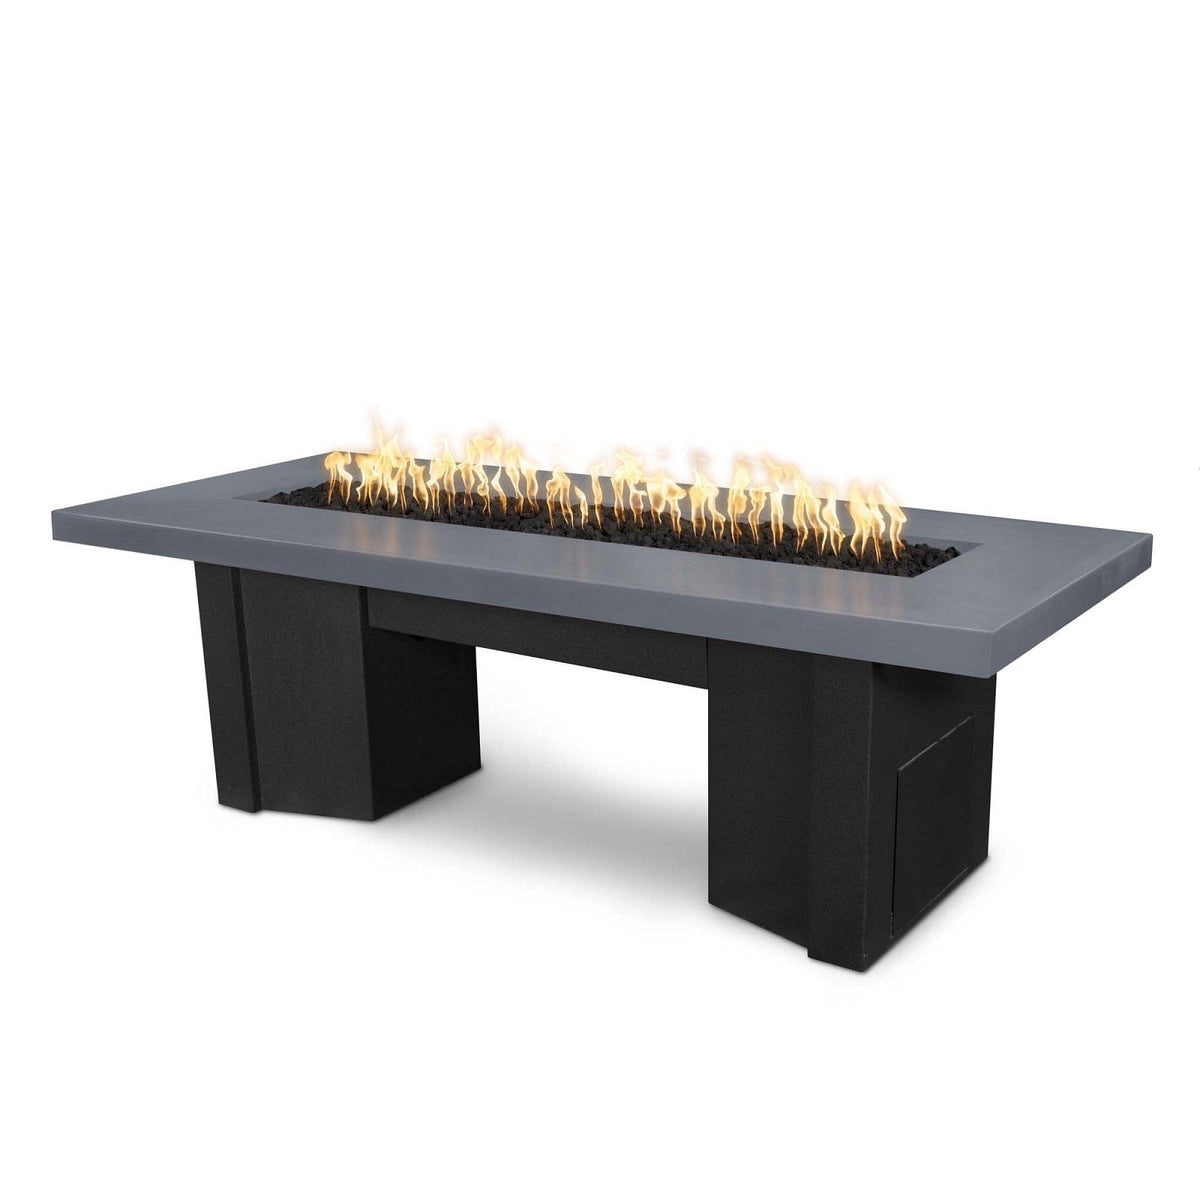 The Outdoor Plus Fire Features Gray (-GRY) / Black Powder Coated Steel (-BLK) The Outdoor Plus 78&quot; Alameda Fire Table Smooth Concrete in Natural Gas - Flame Sense System with Push Button Spark Igniter / OPT-ALMGFRC78FSEN-NG